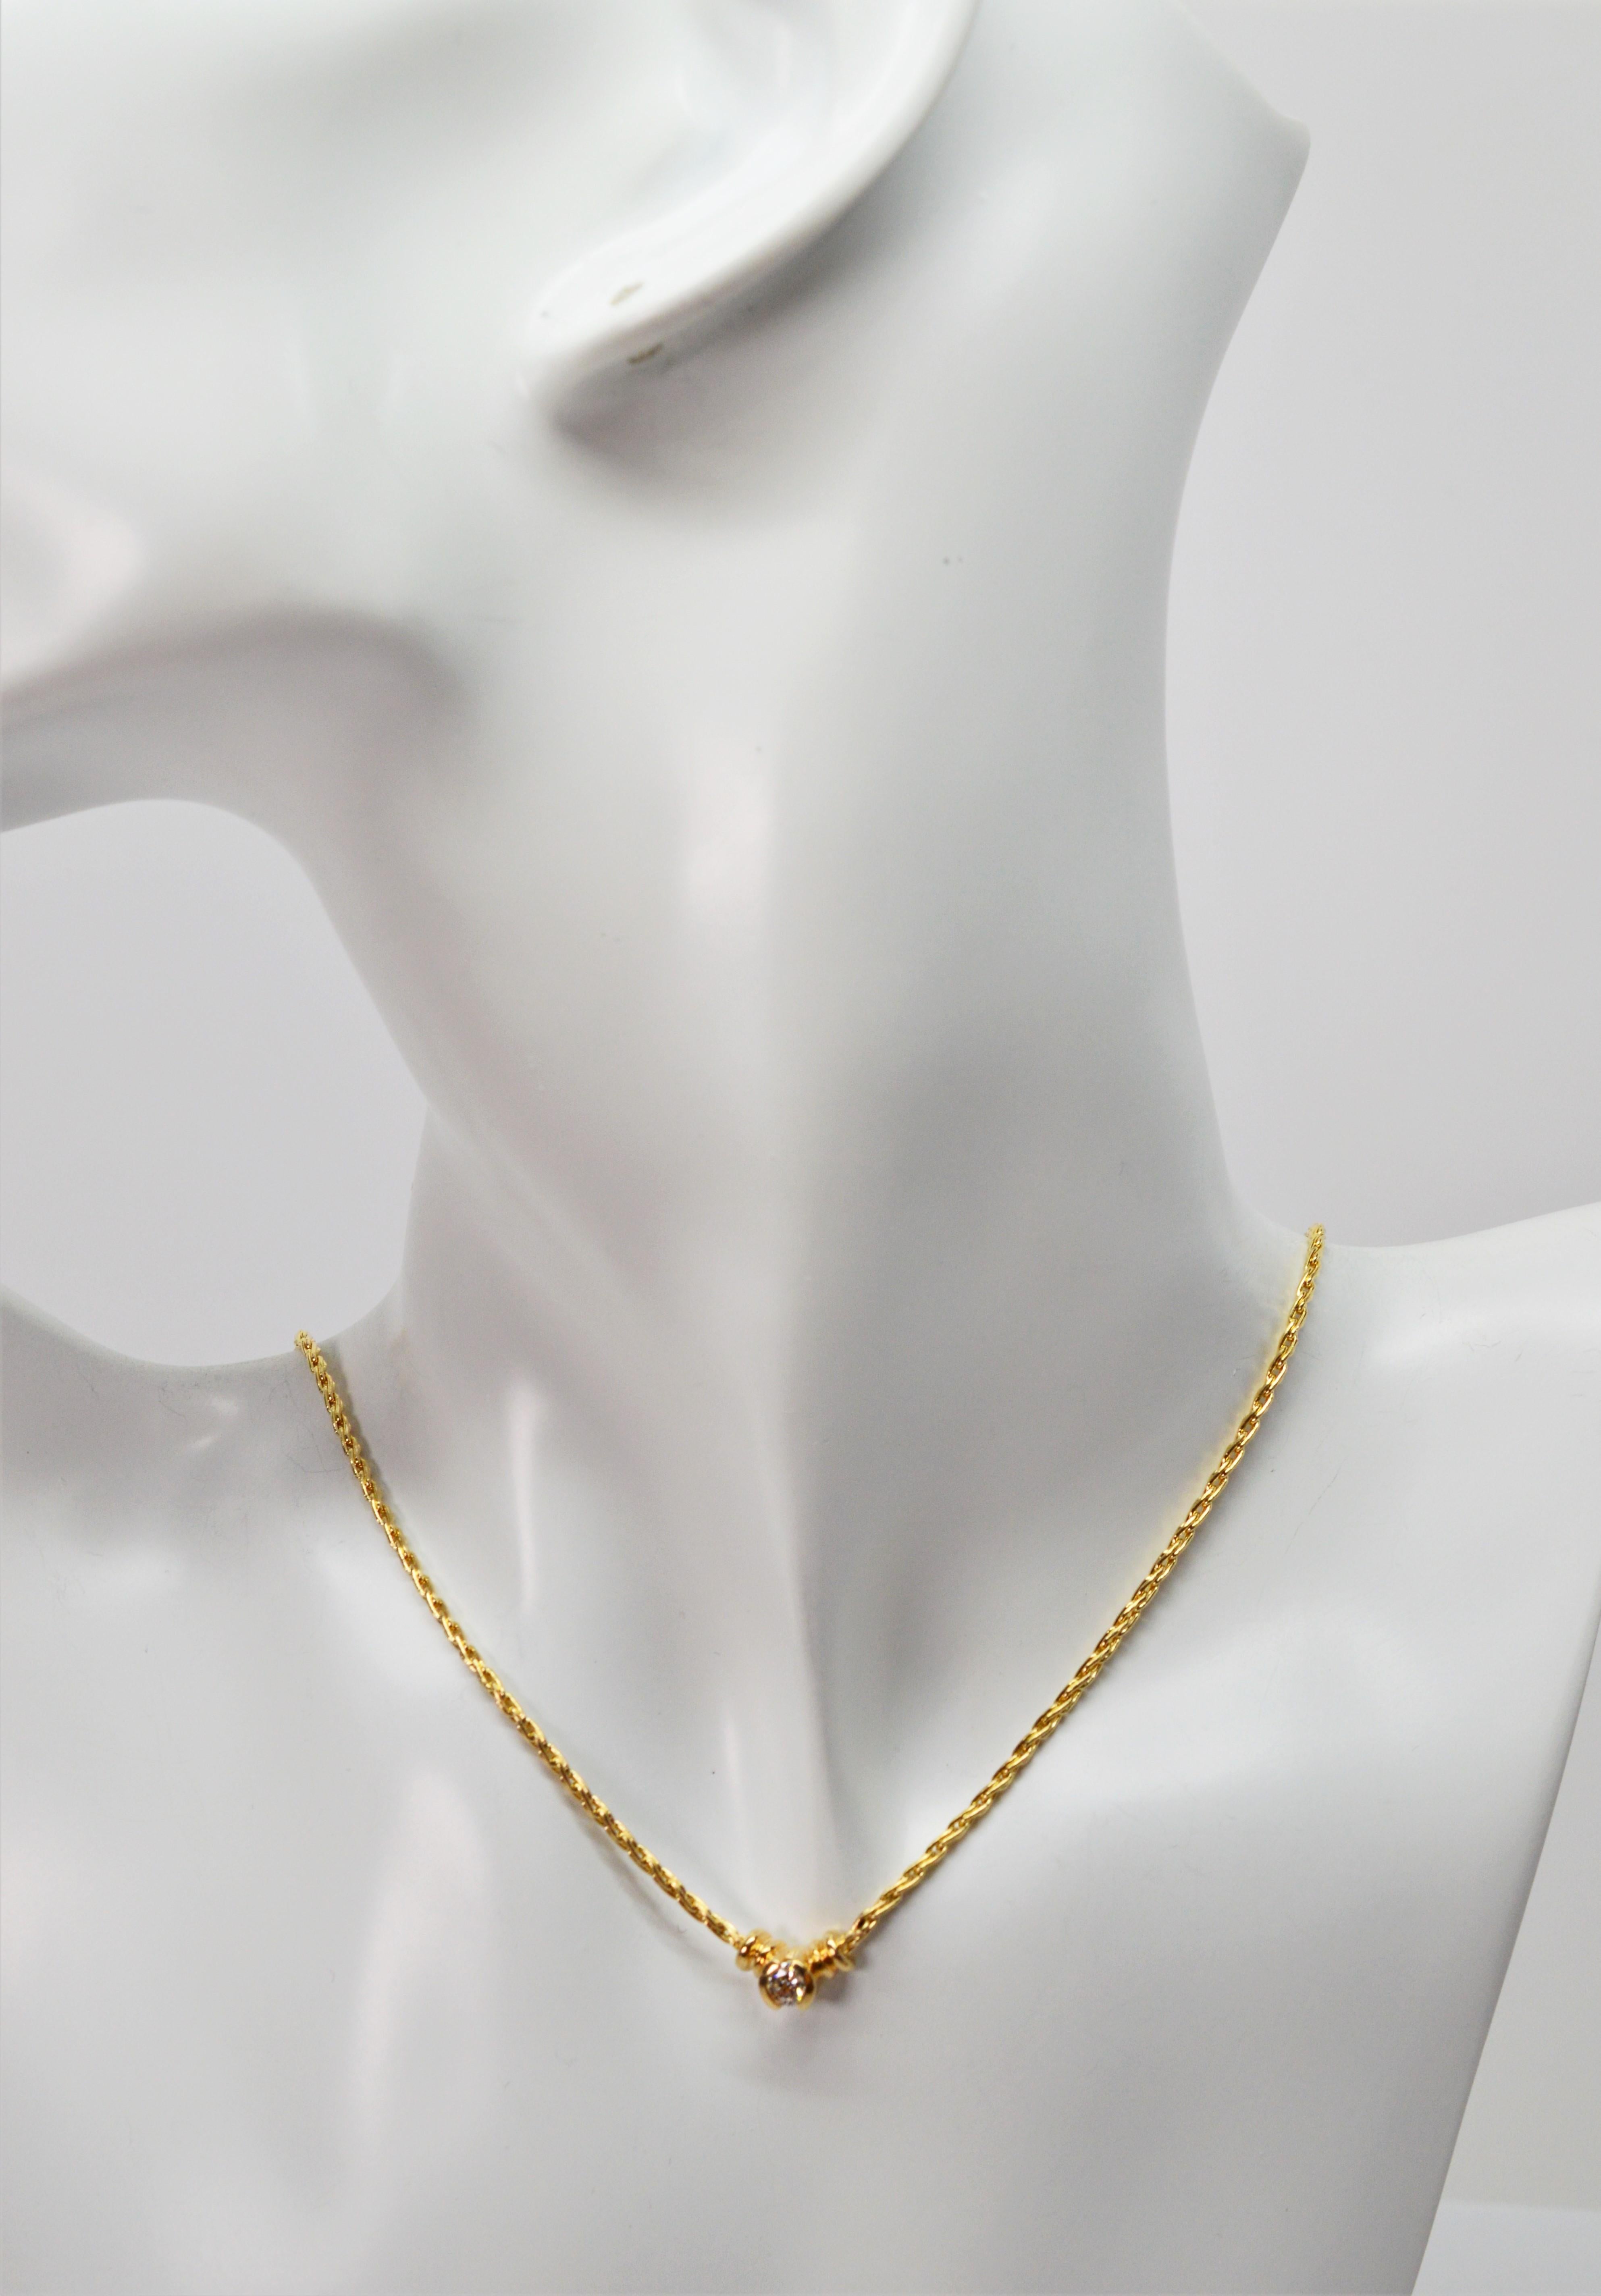 Diamond Solitaire Yellow Gold Wheat Chain Necklace In Excellent Condition For Sale In Mount Kisco, NY